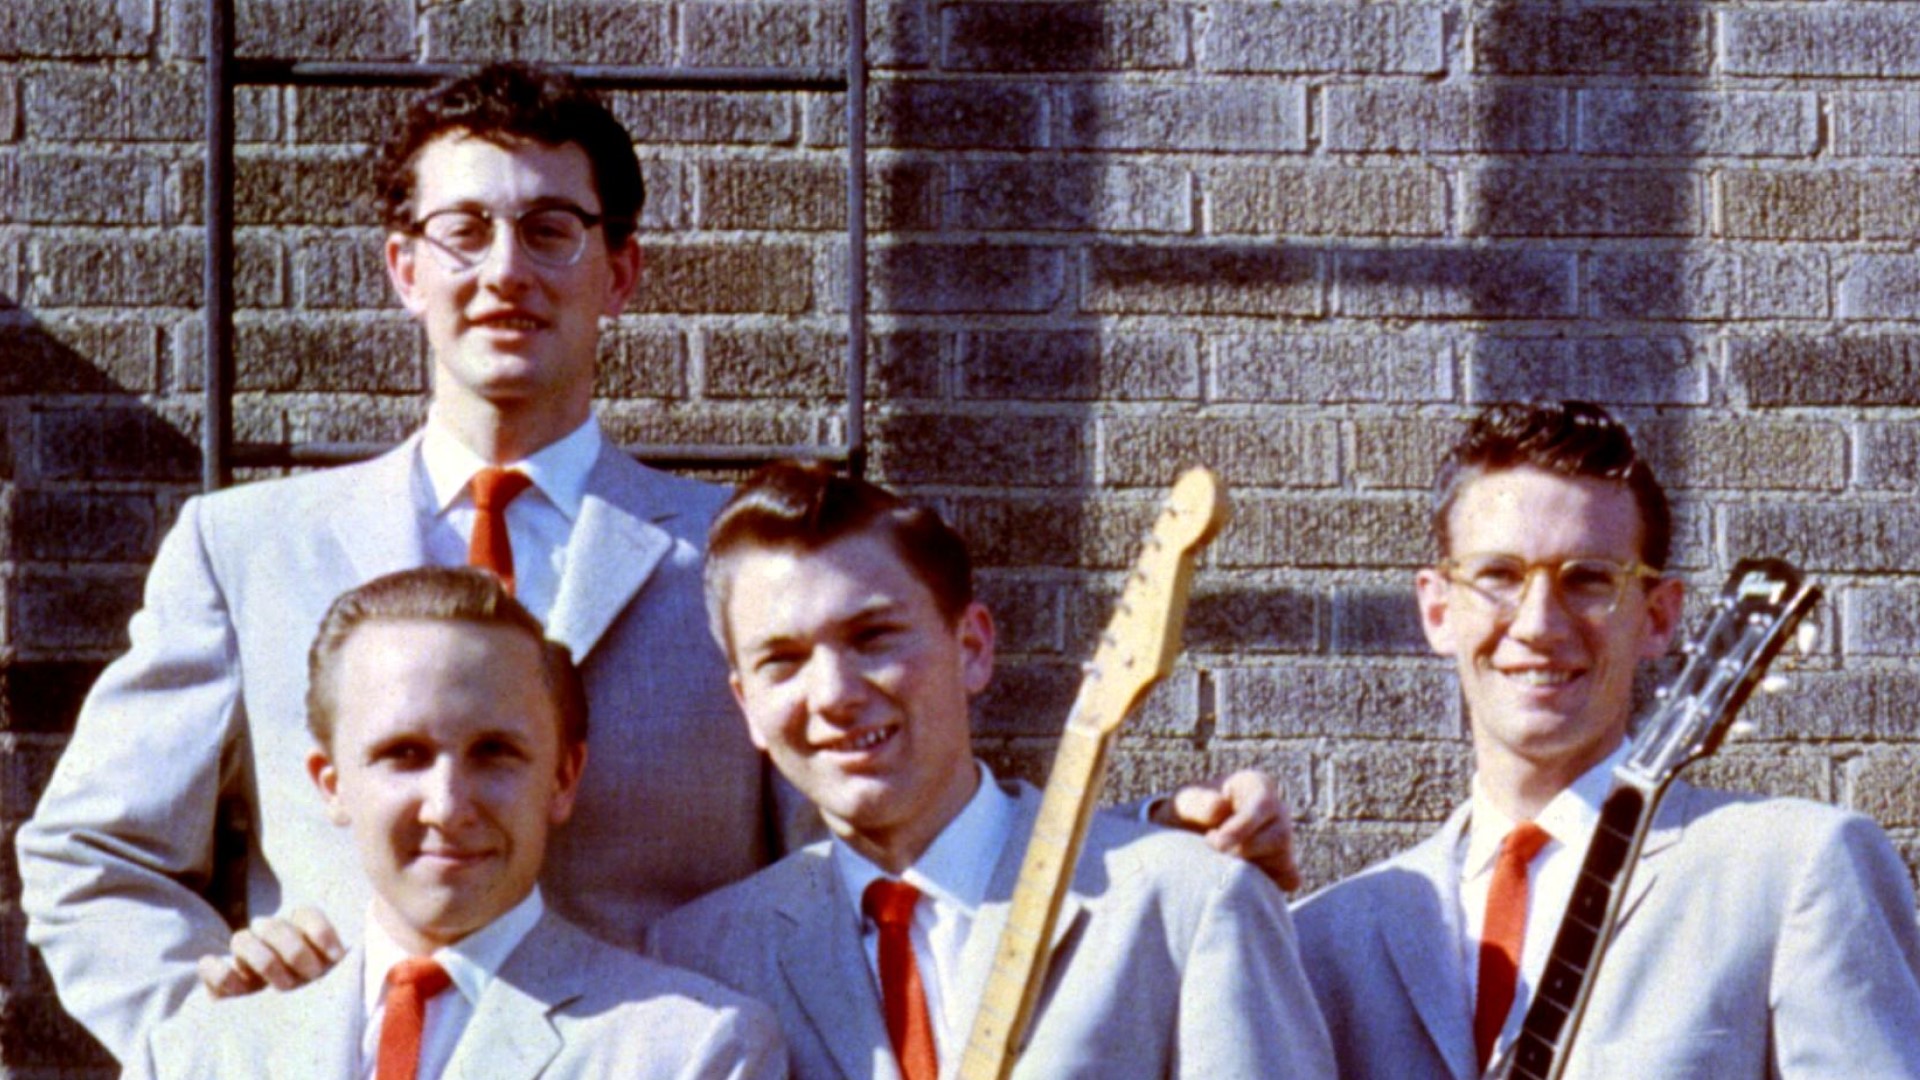 Buddy Holly and the Crickets - 'That'll Be The Day' (1957)